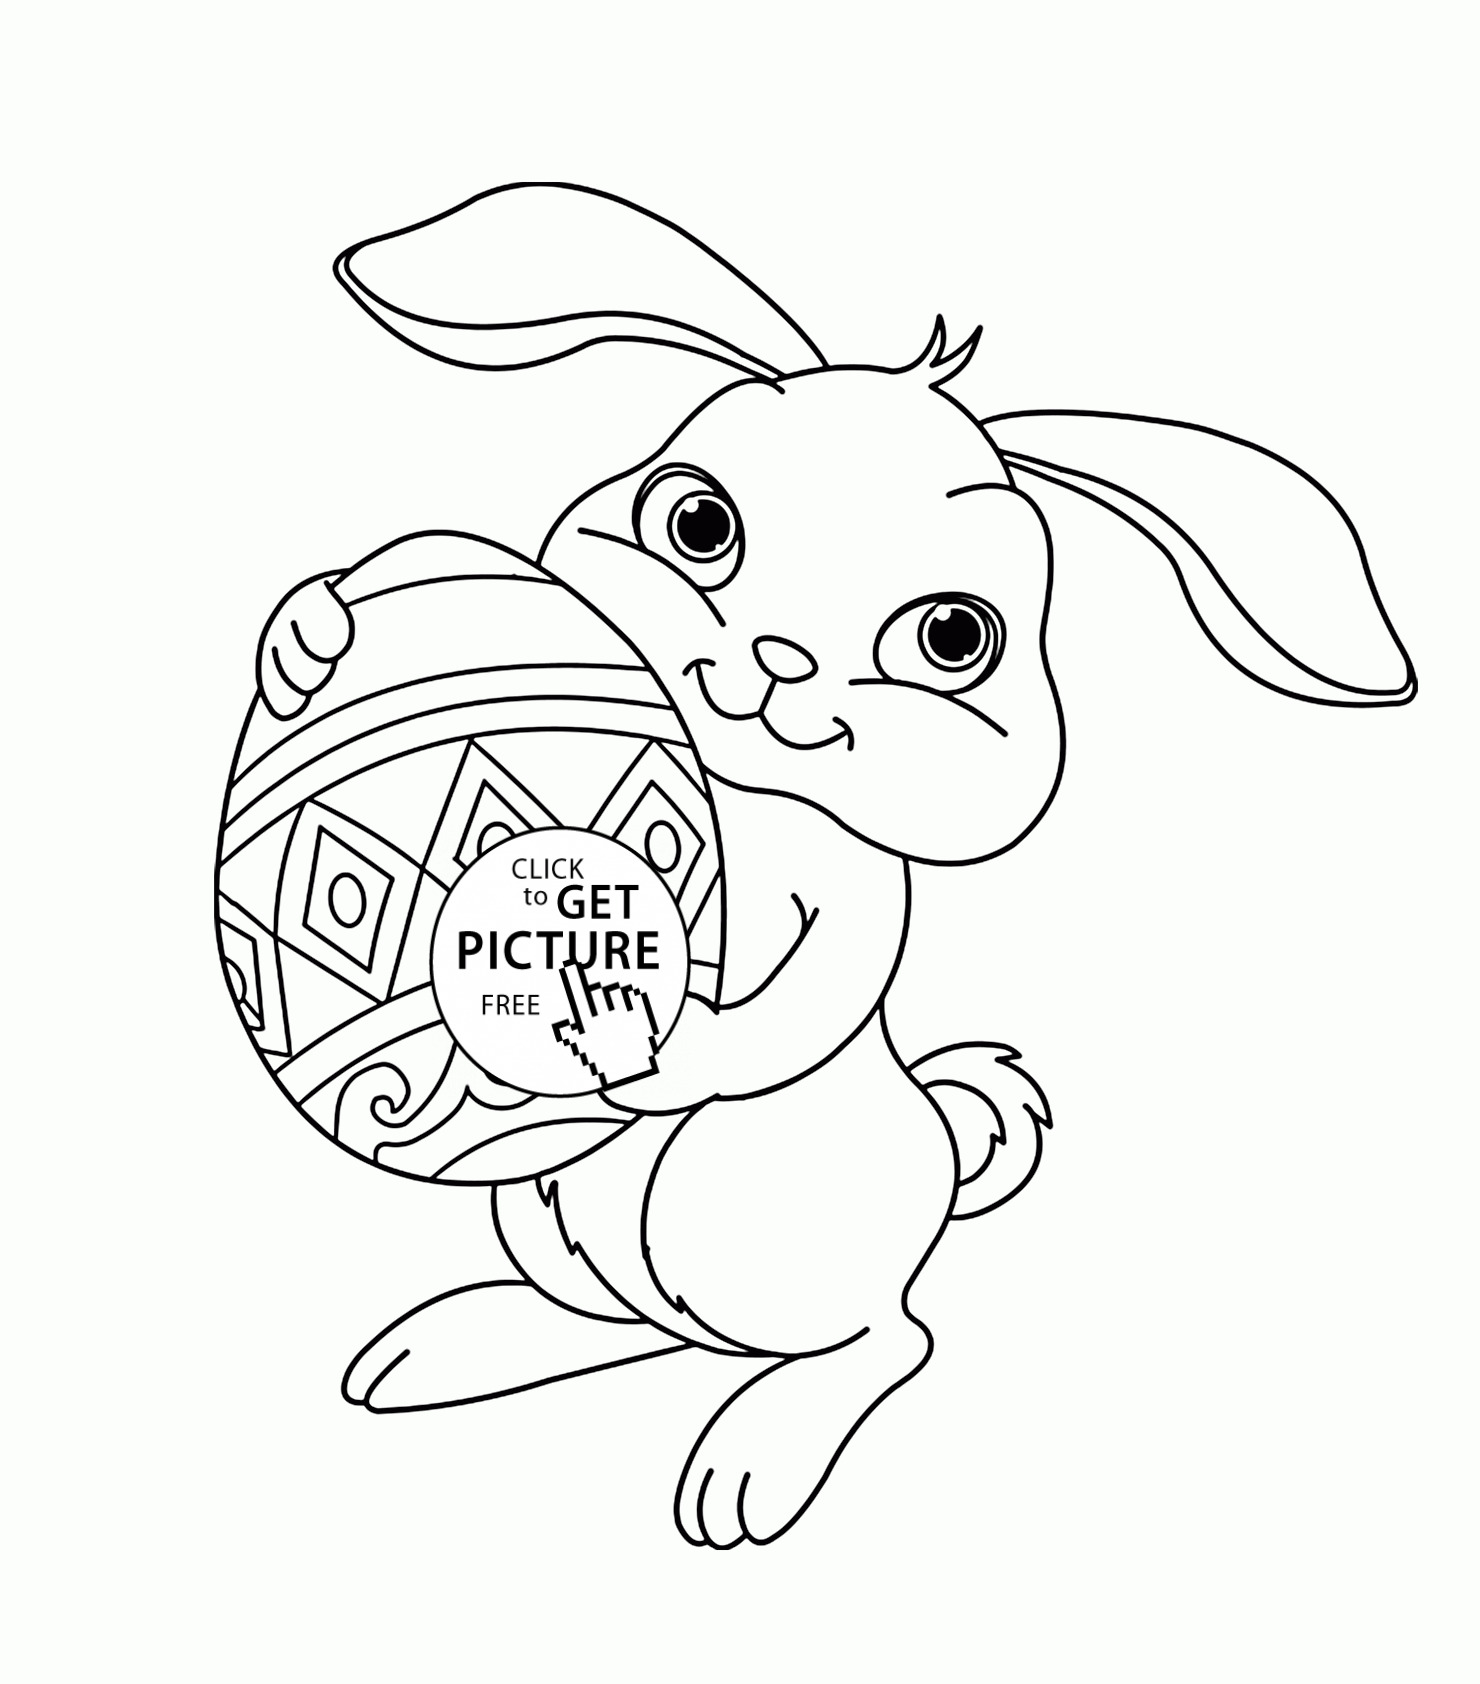 Cute Easter Bunny coloring page for kids, coloring pages ...